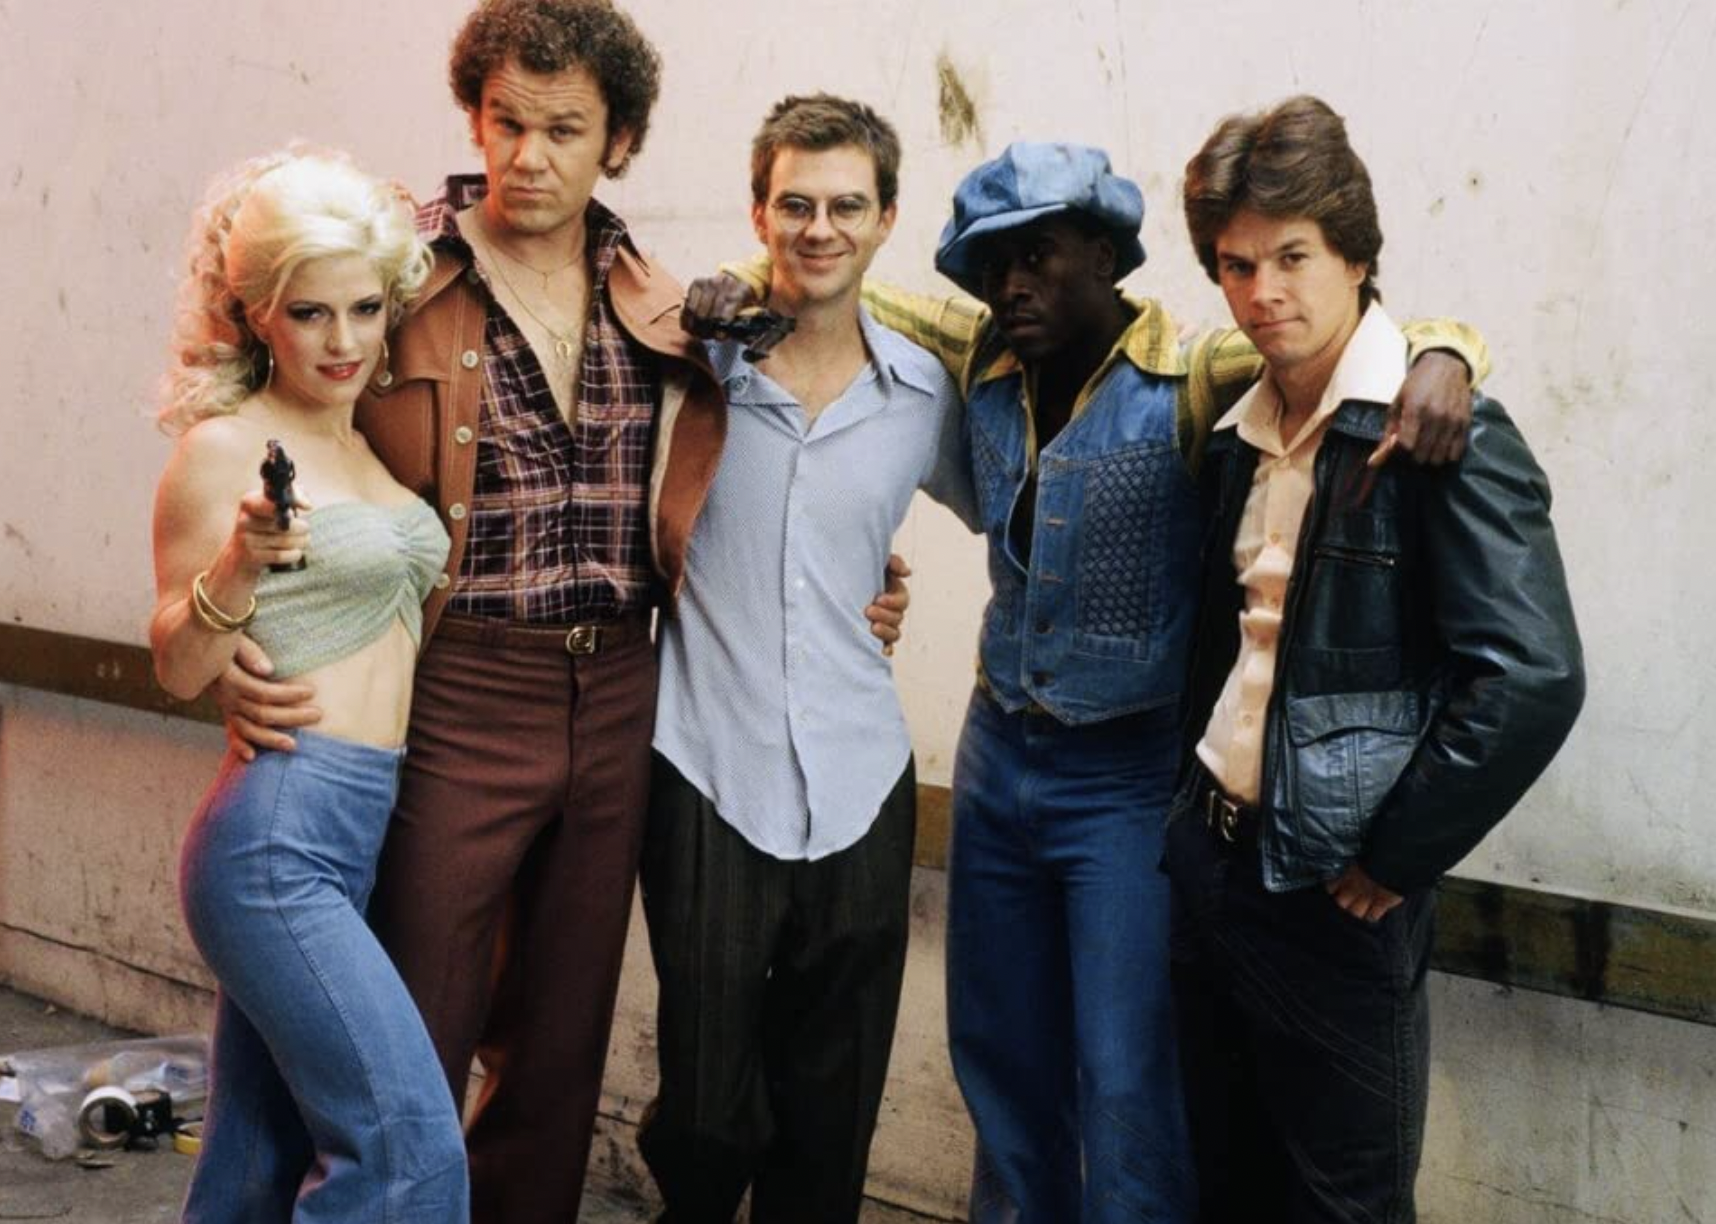 Mark Wahlberg, Don Cheadle, John C. Reilly, Paul Thomas Anderson, and Melora Walters in "Boogie Nights"